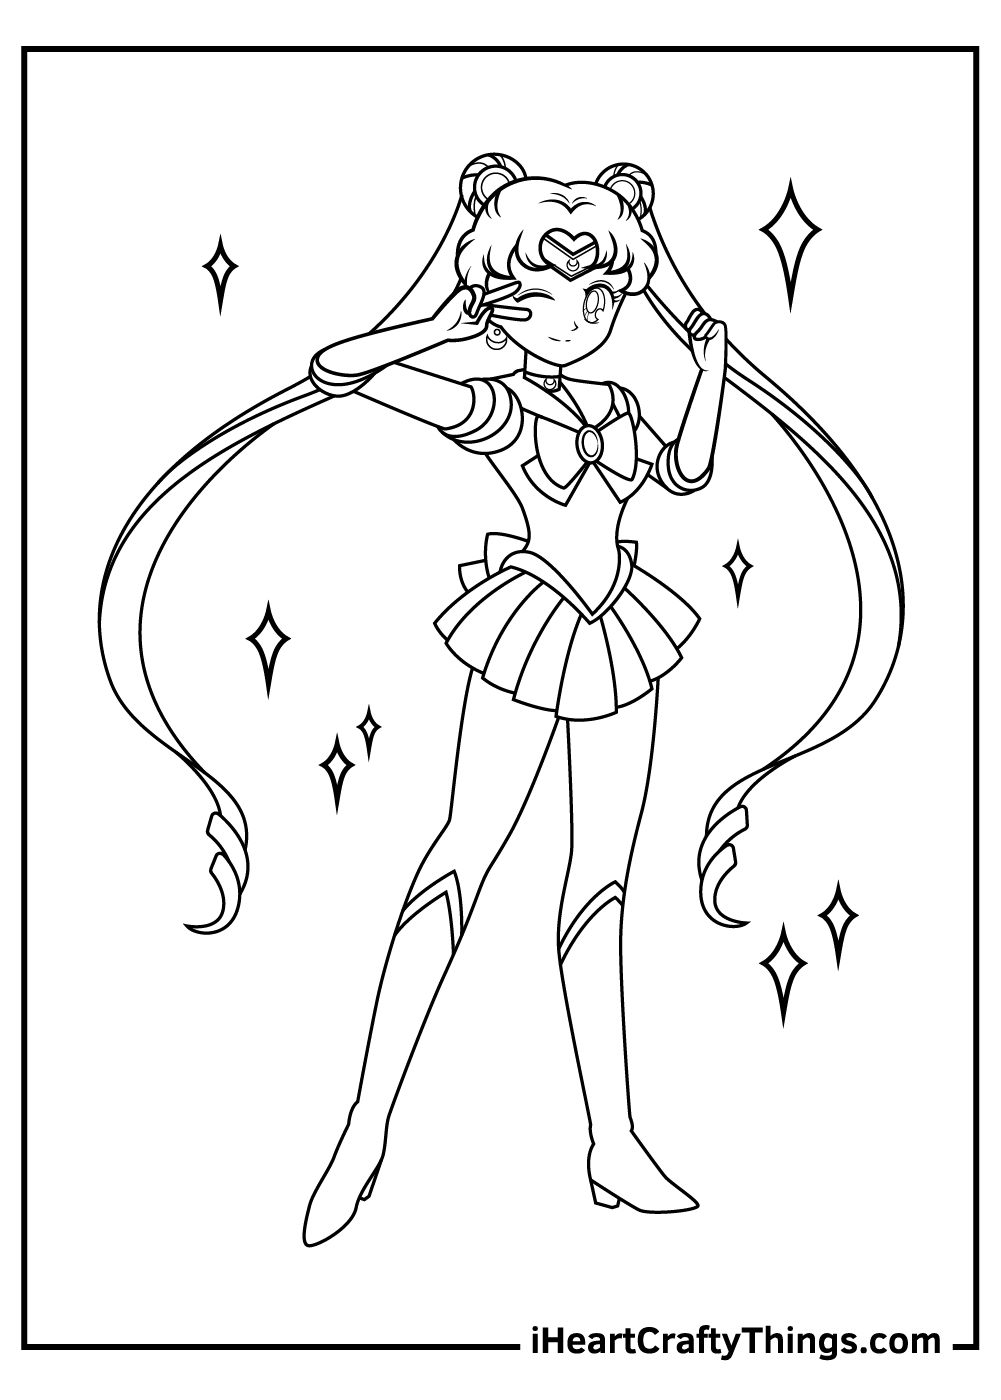 Sailor moon coloring pages free printables